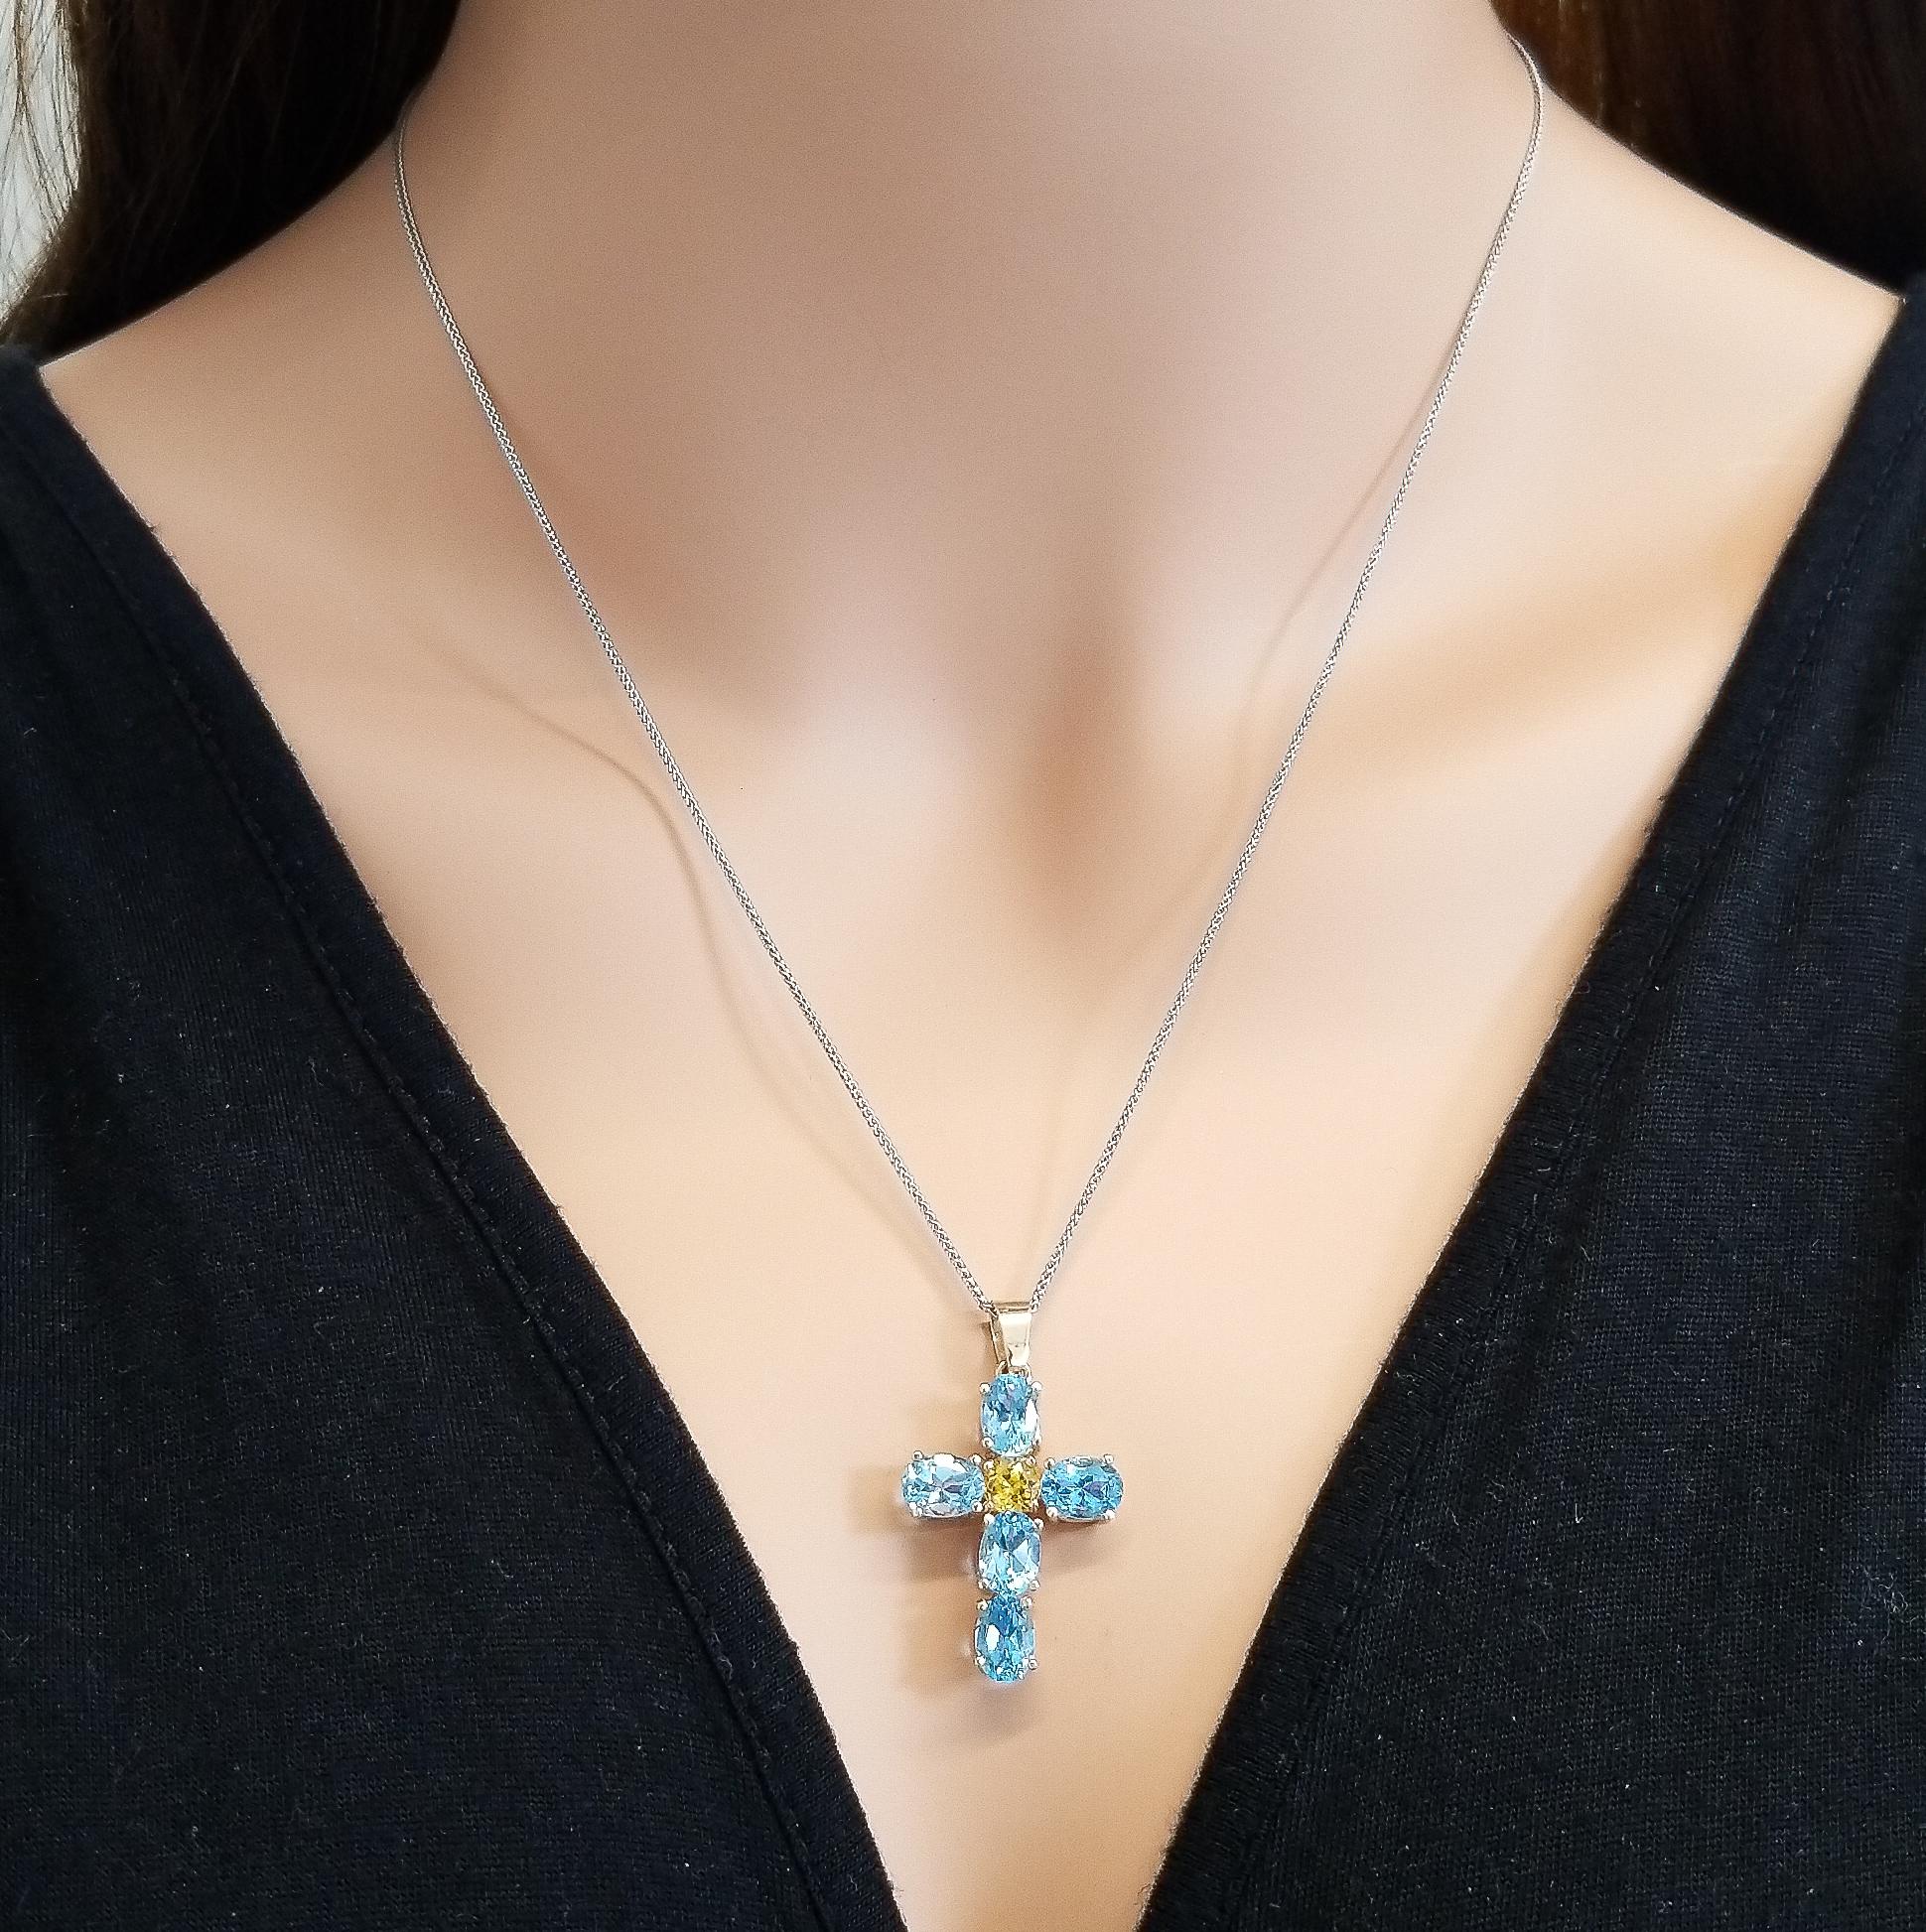 This is a vibrant, distinct gem Cross that will uplift you everytime. 5 Swiss blue topaz, oval cut, and one round cut intense orangey-yellow citrine garnet comprise this pendant. The gems' source is Brazil. Perfectly matched in color, size, luster